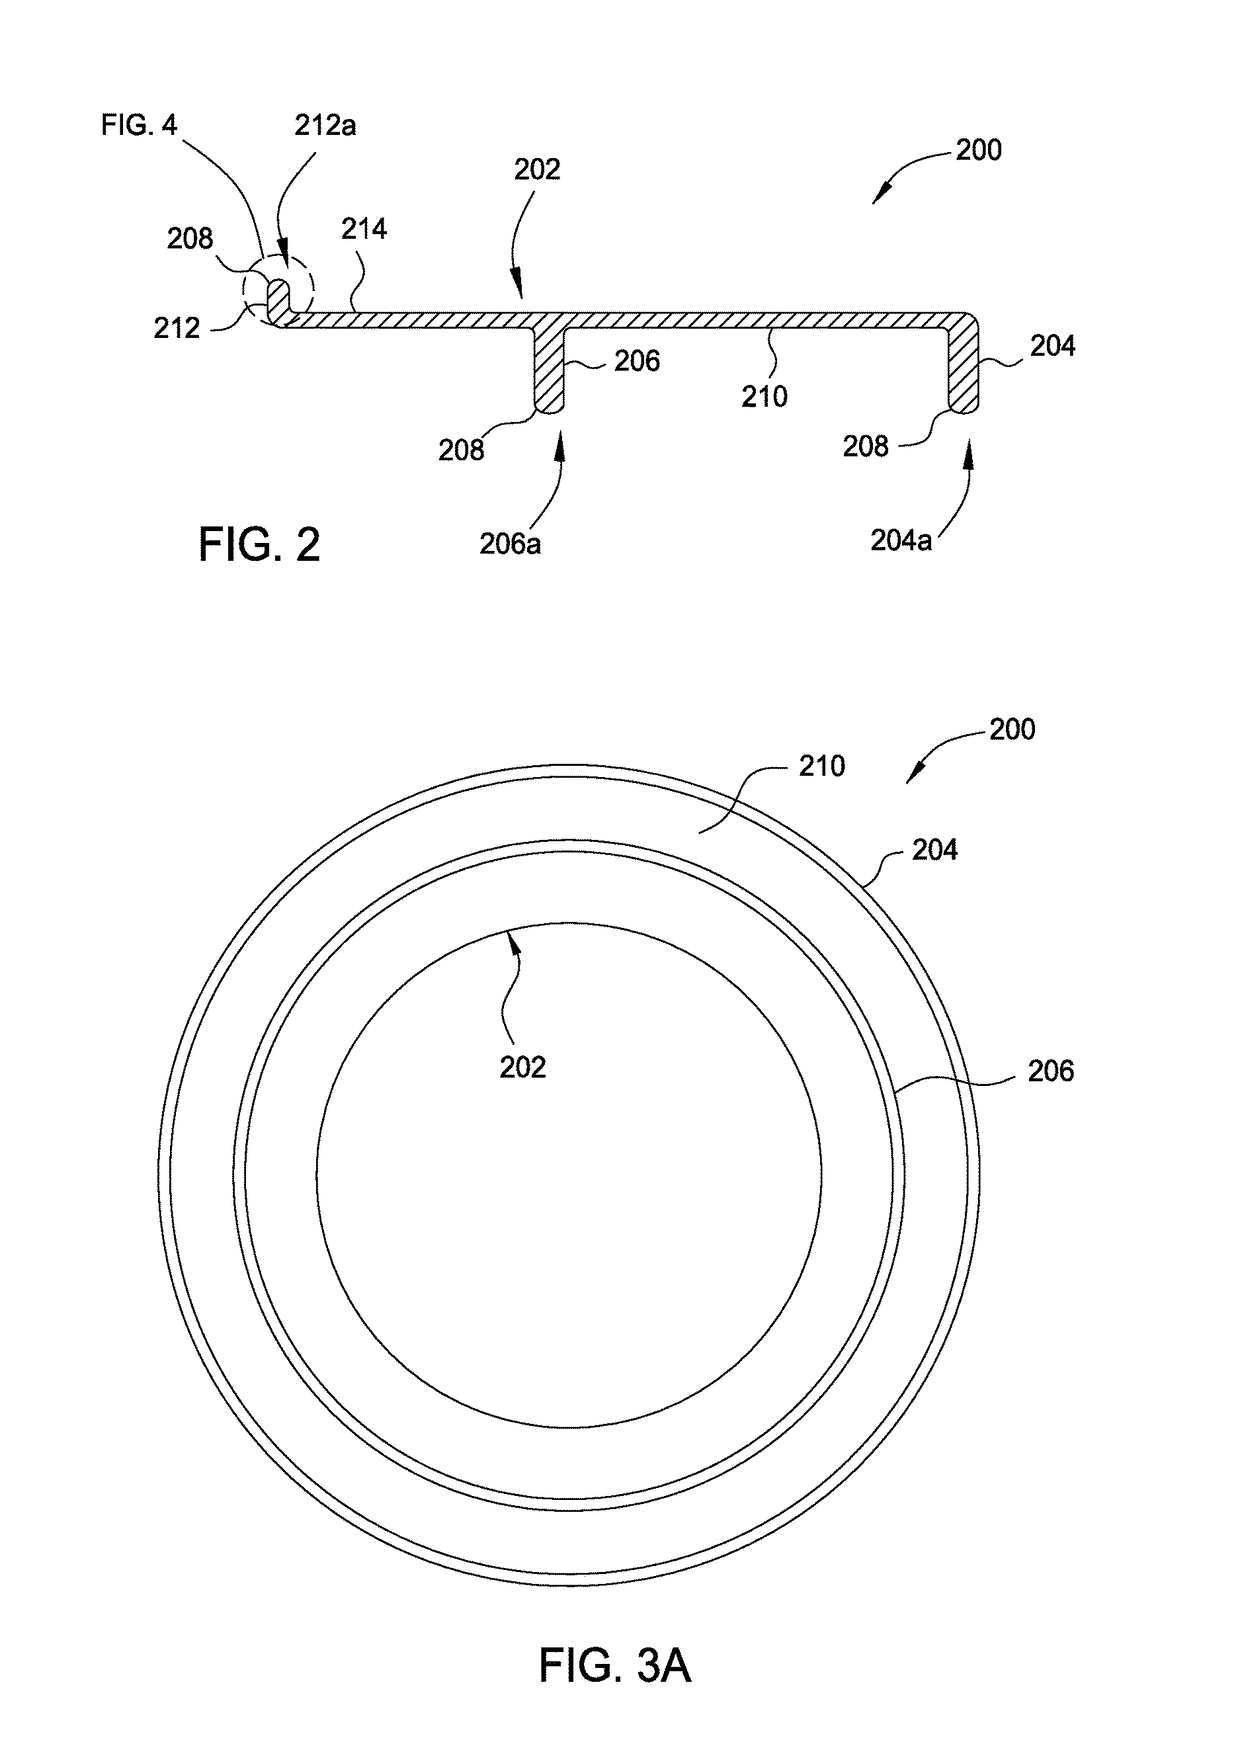 Minimal contact edge ring for rapid thermal processing